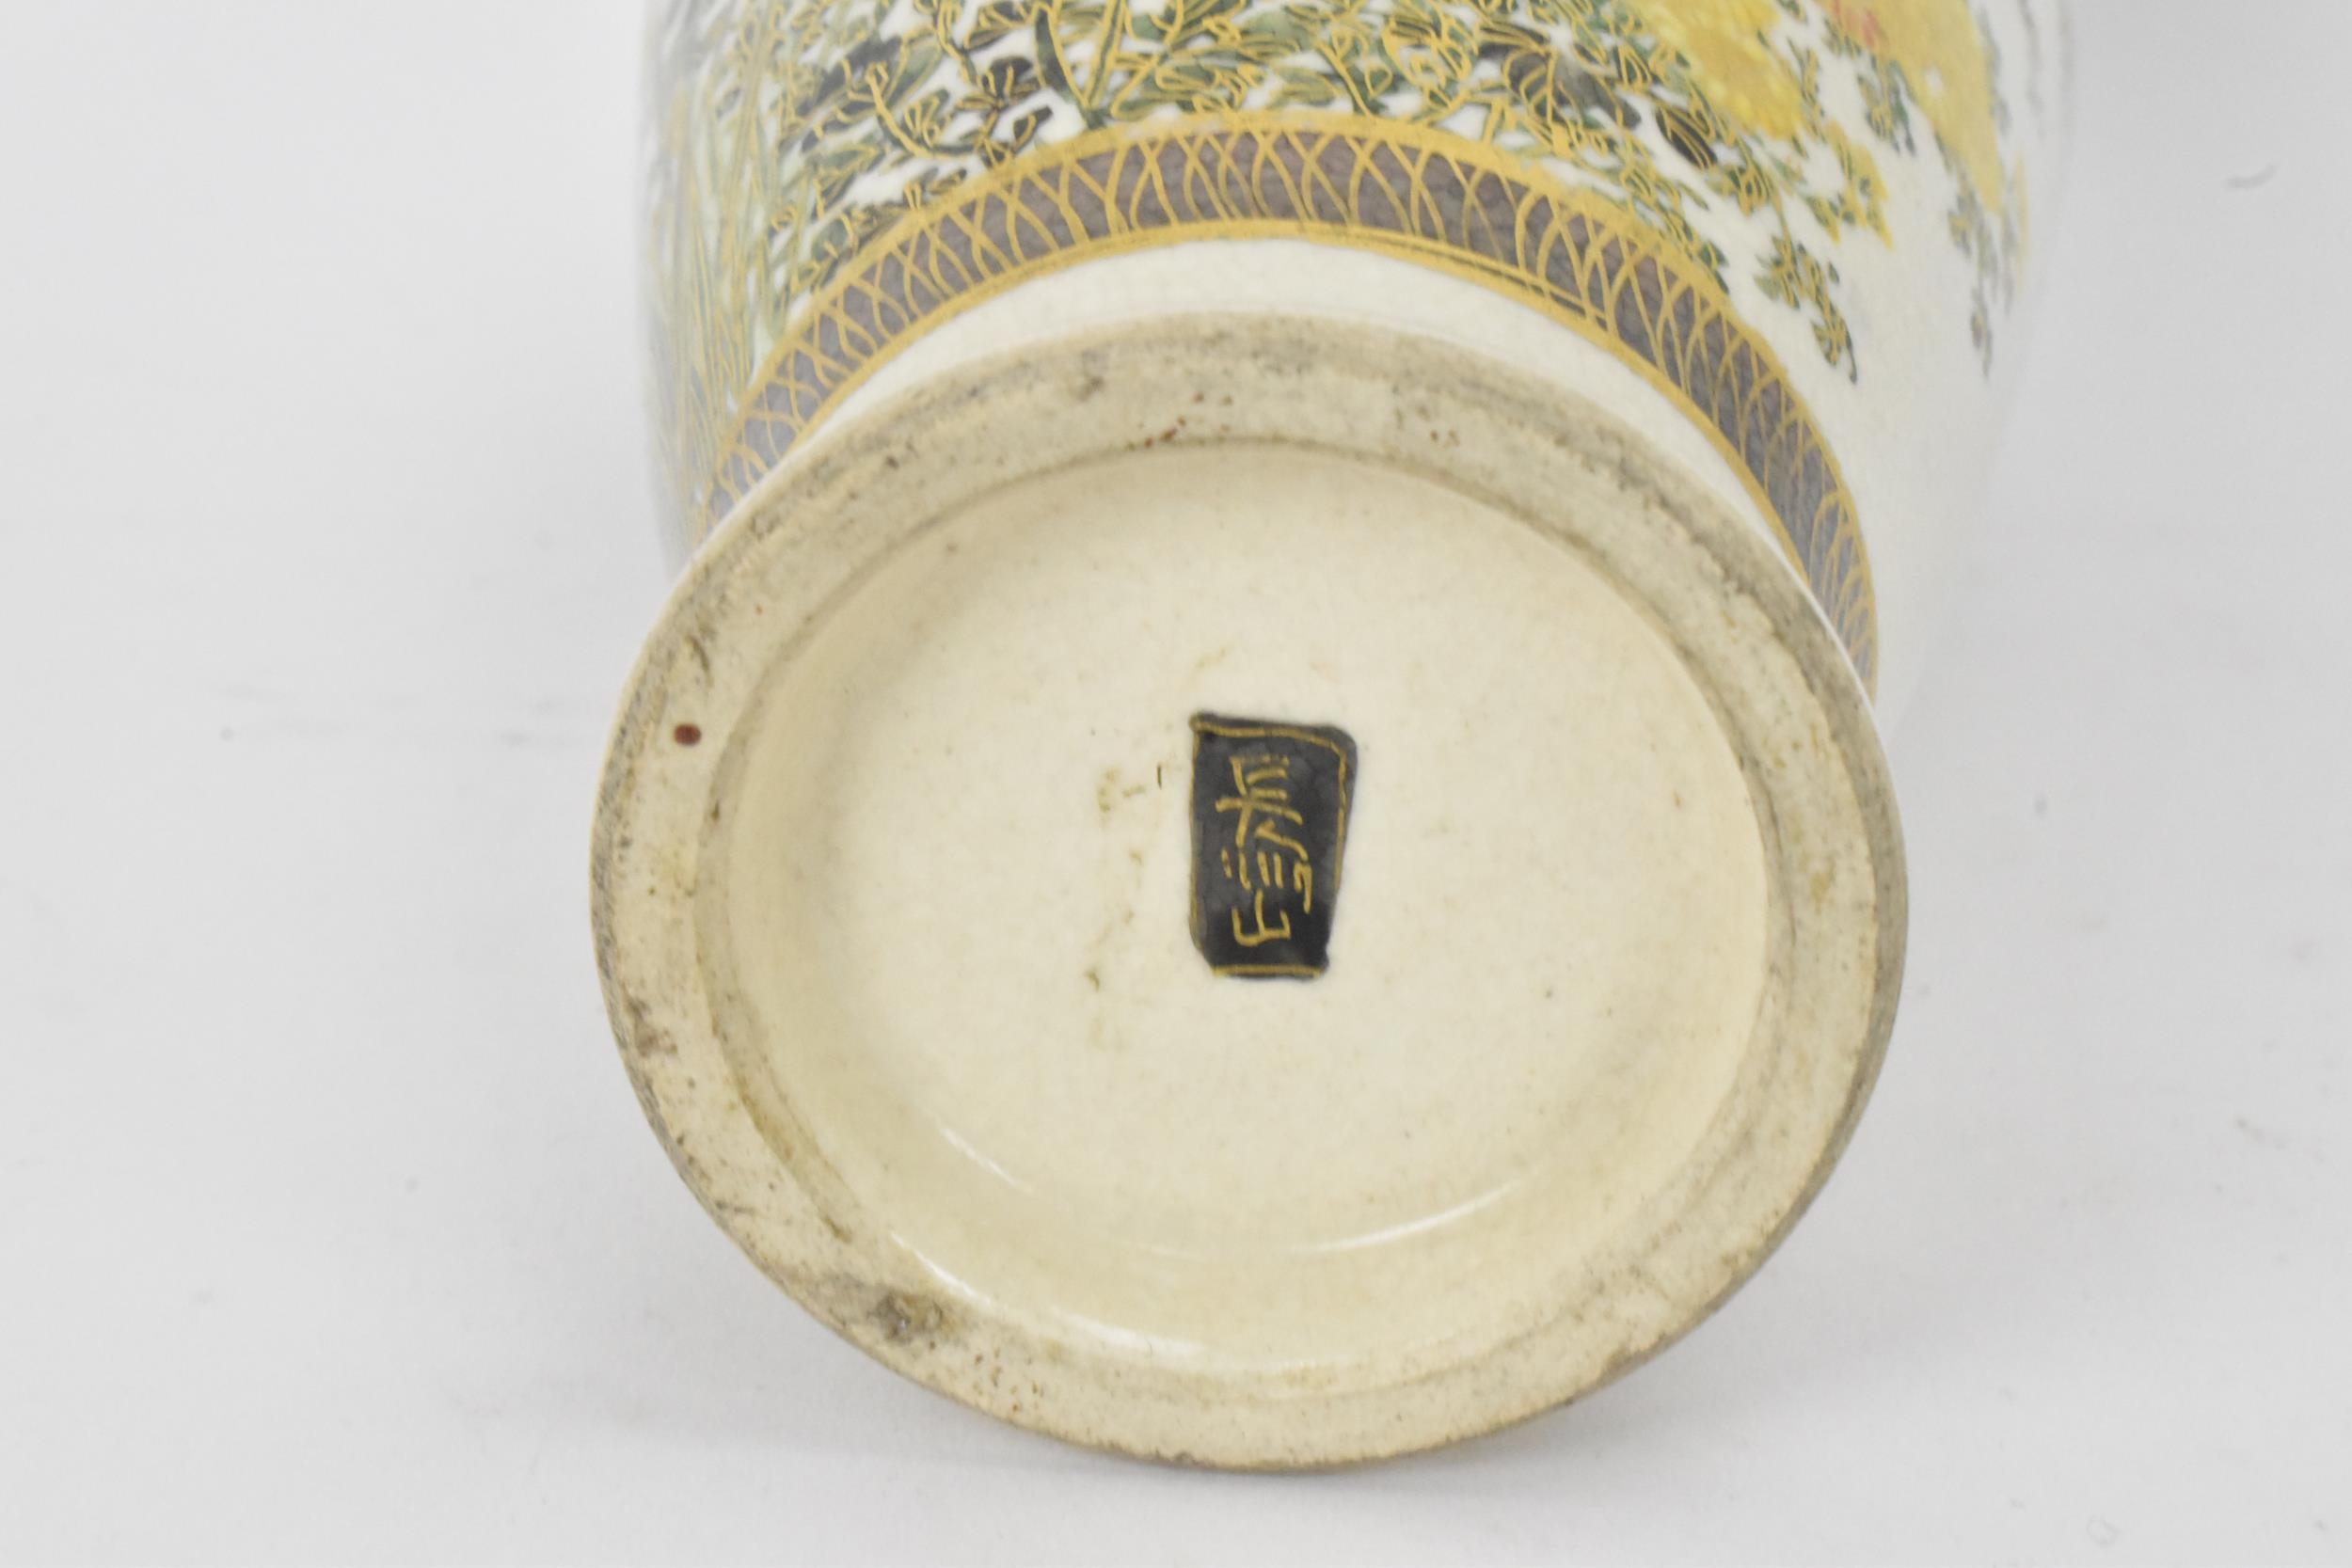 A Japanese Meiji period satsuma vase, of ovoid shape with flared rim, decorated with floral sprays - Image 6 of 6